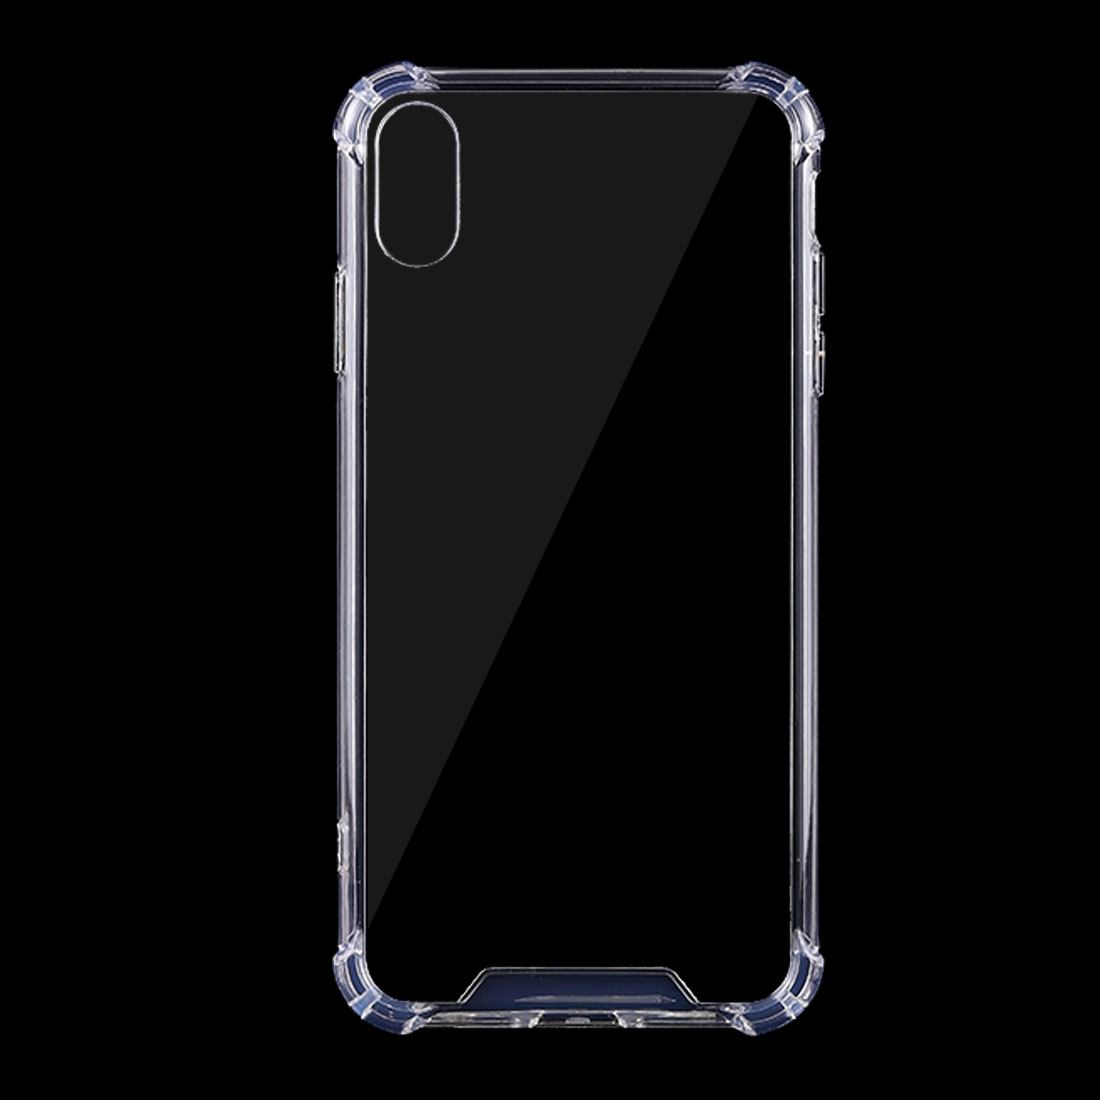 For iPhone XS Max Case Transparent Slim TPU Back Shell Cover Bumper Protection